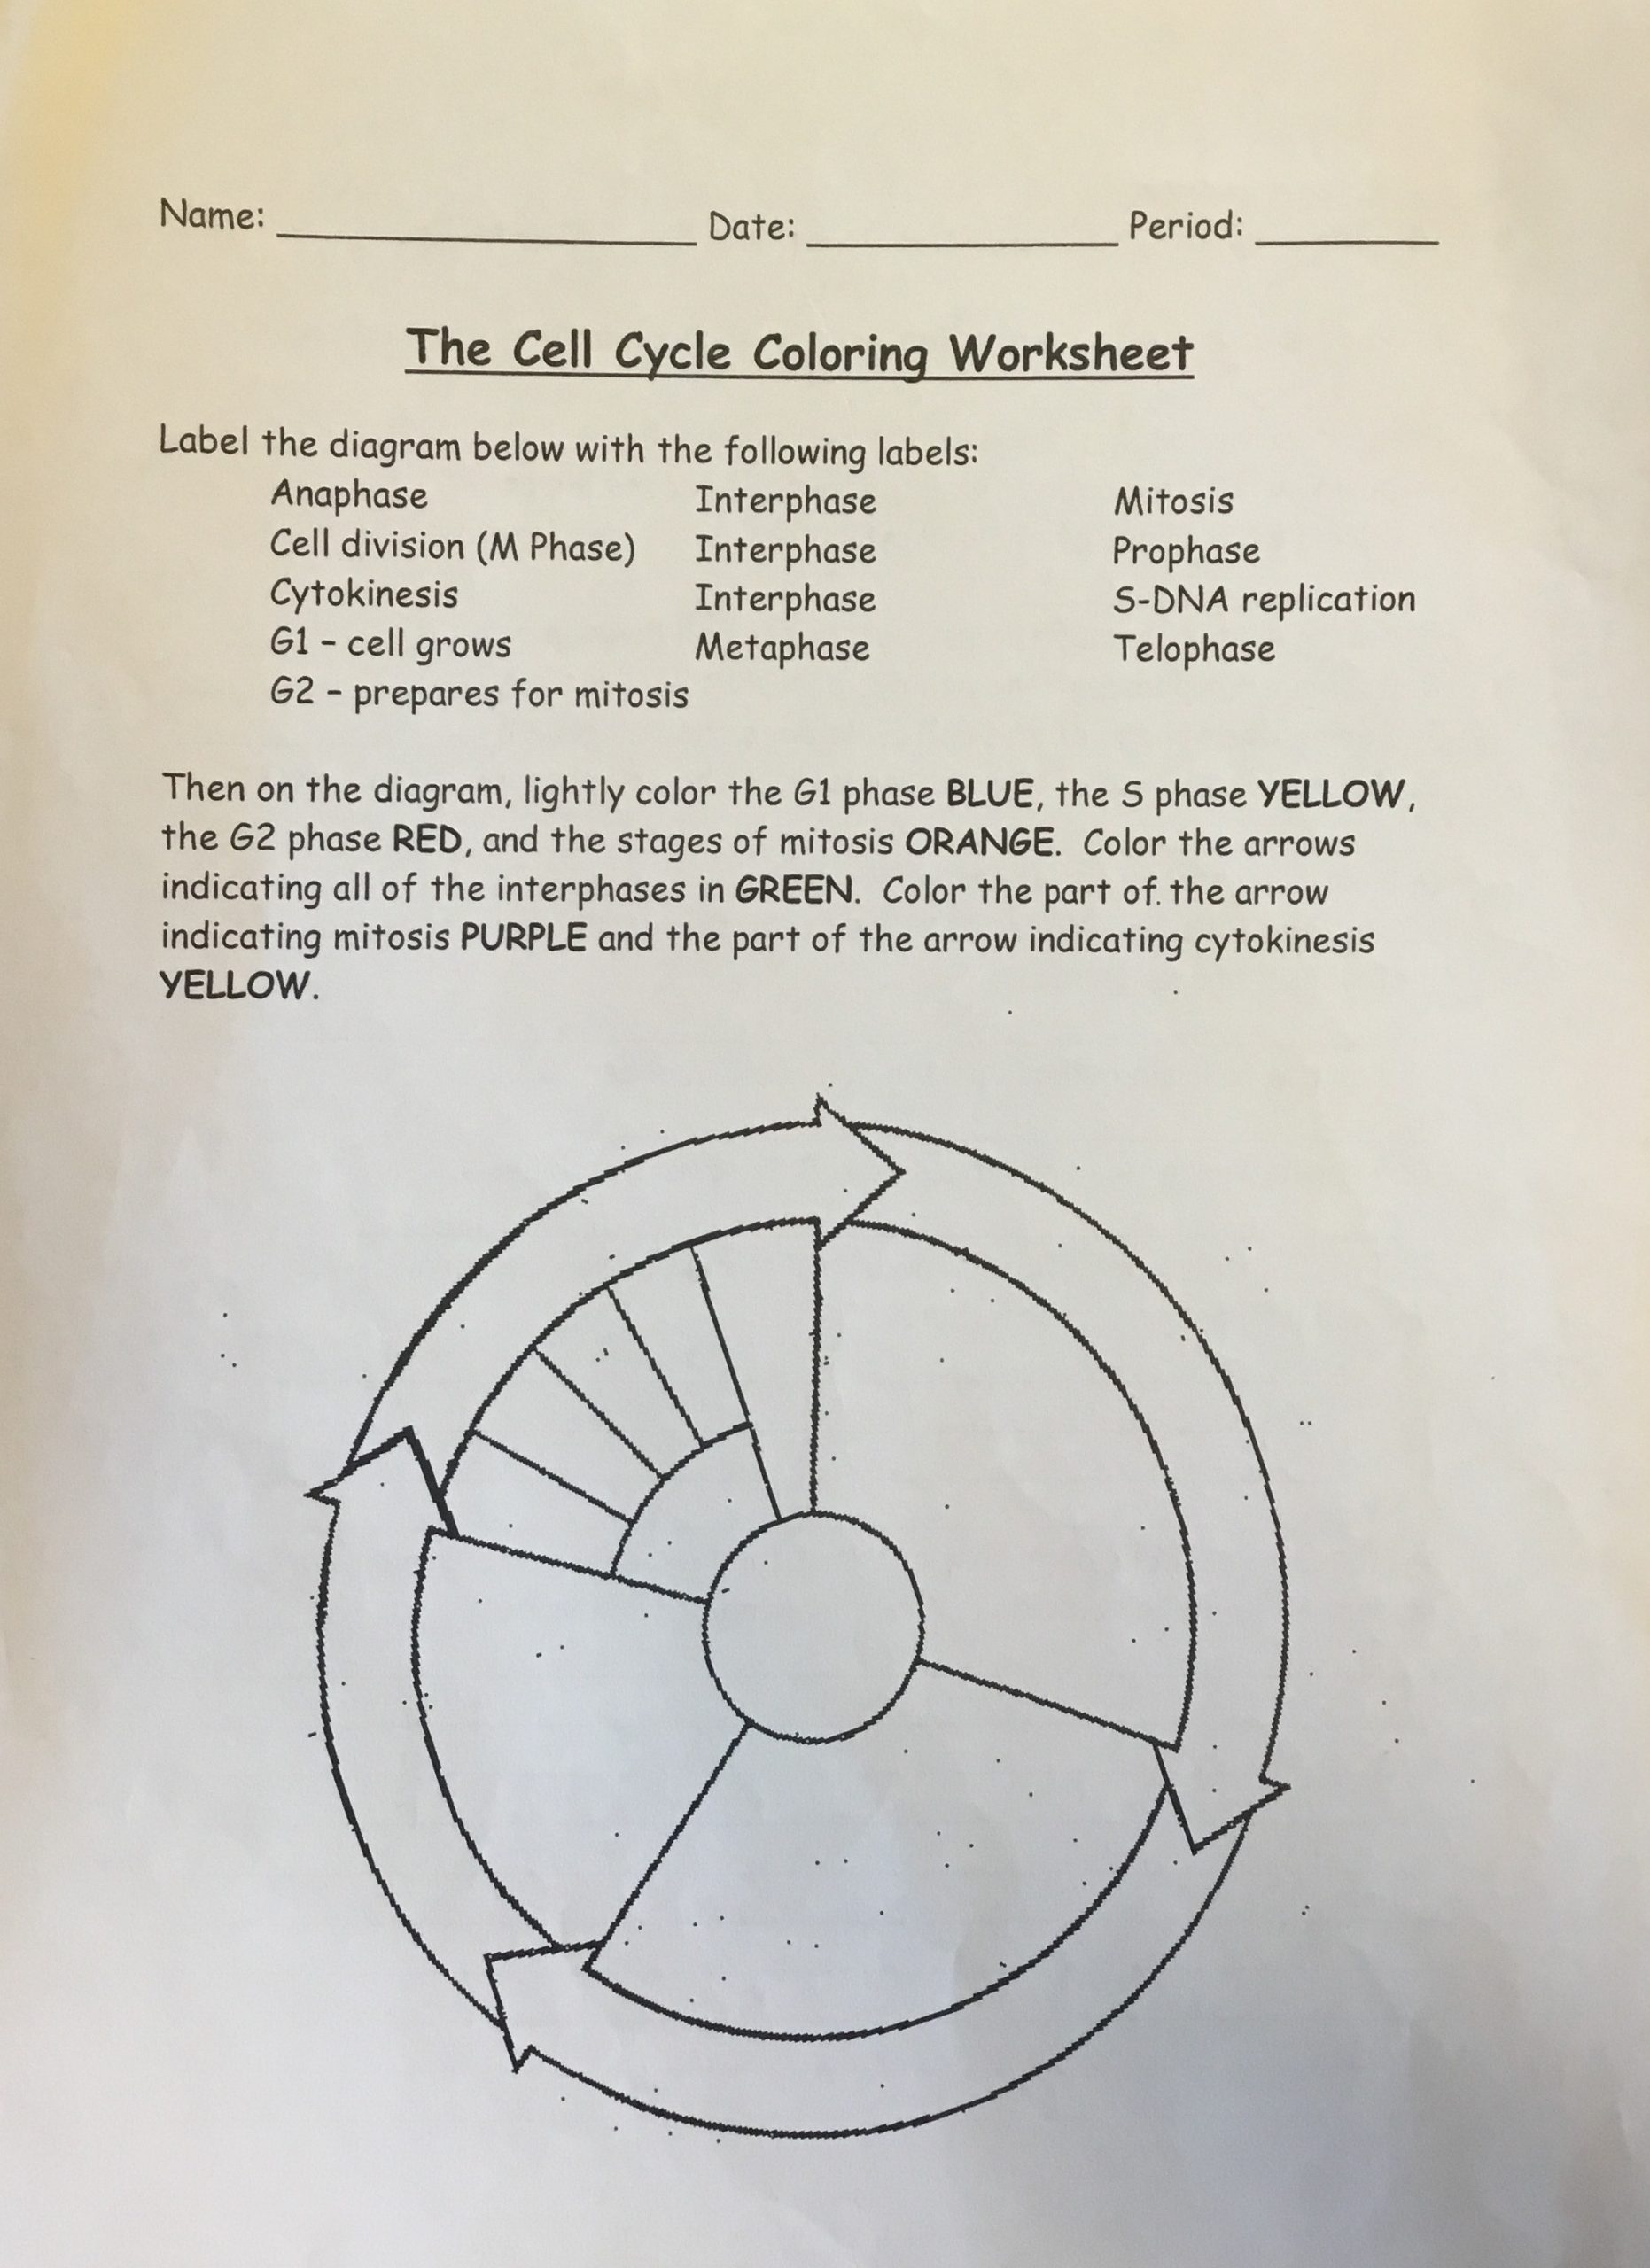 Cell Cycle Coloring Worksheet Holdcroft S Reproduction and Development